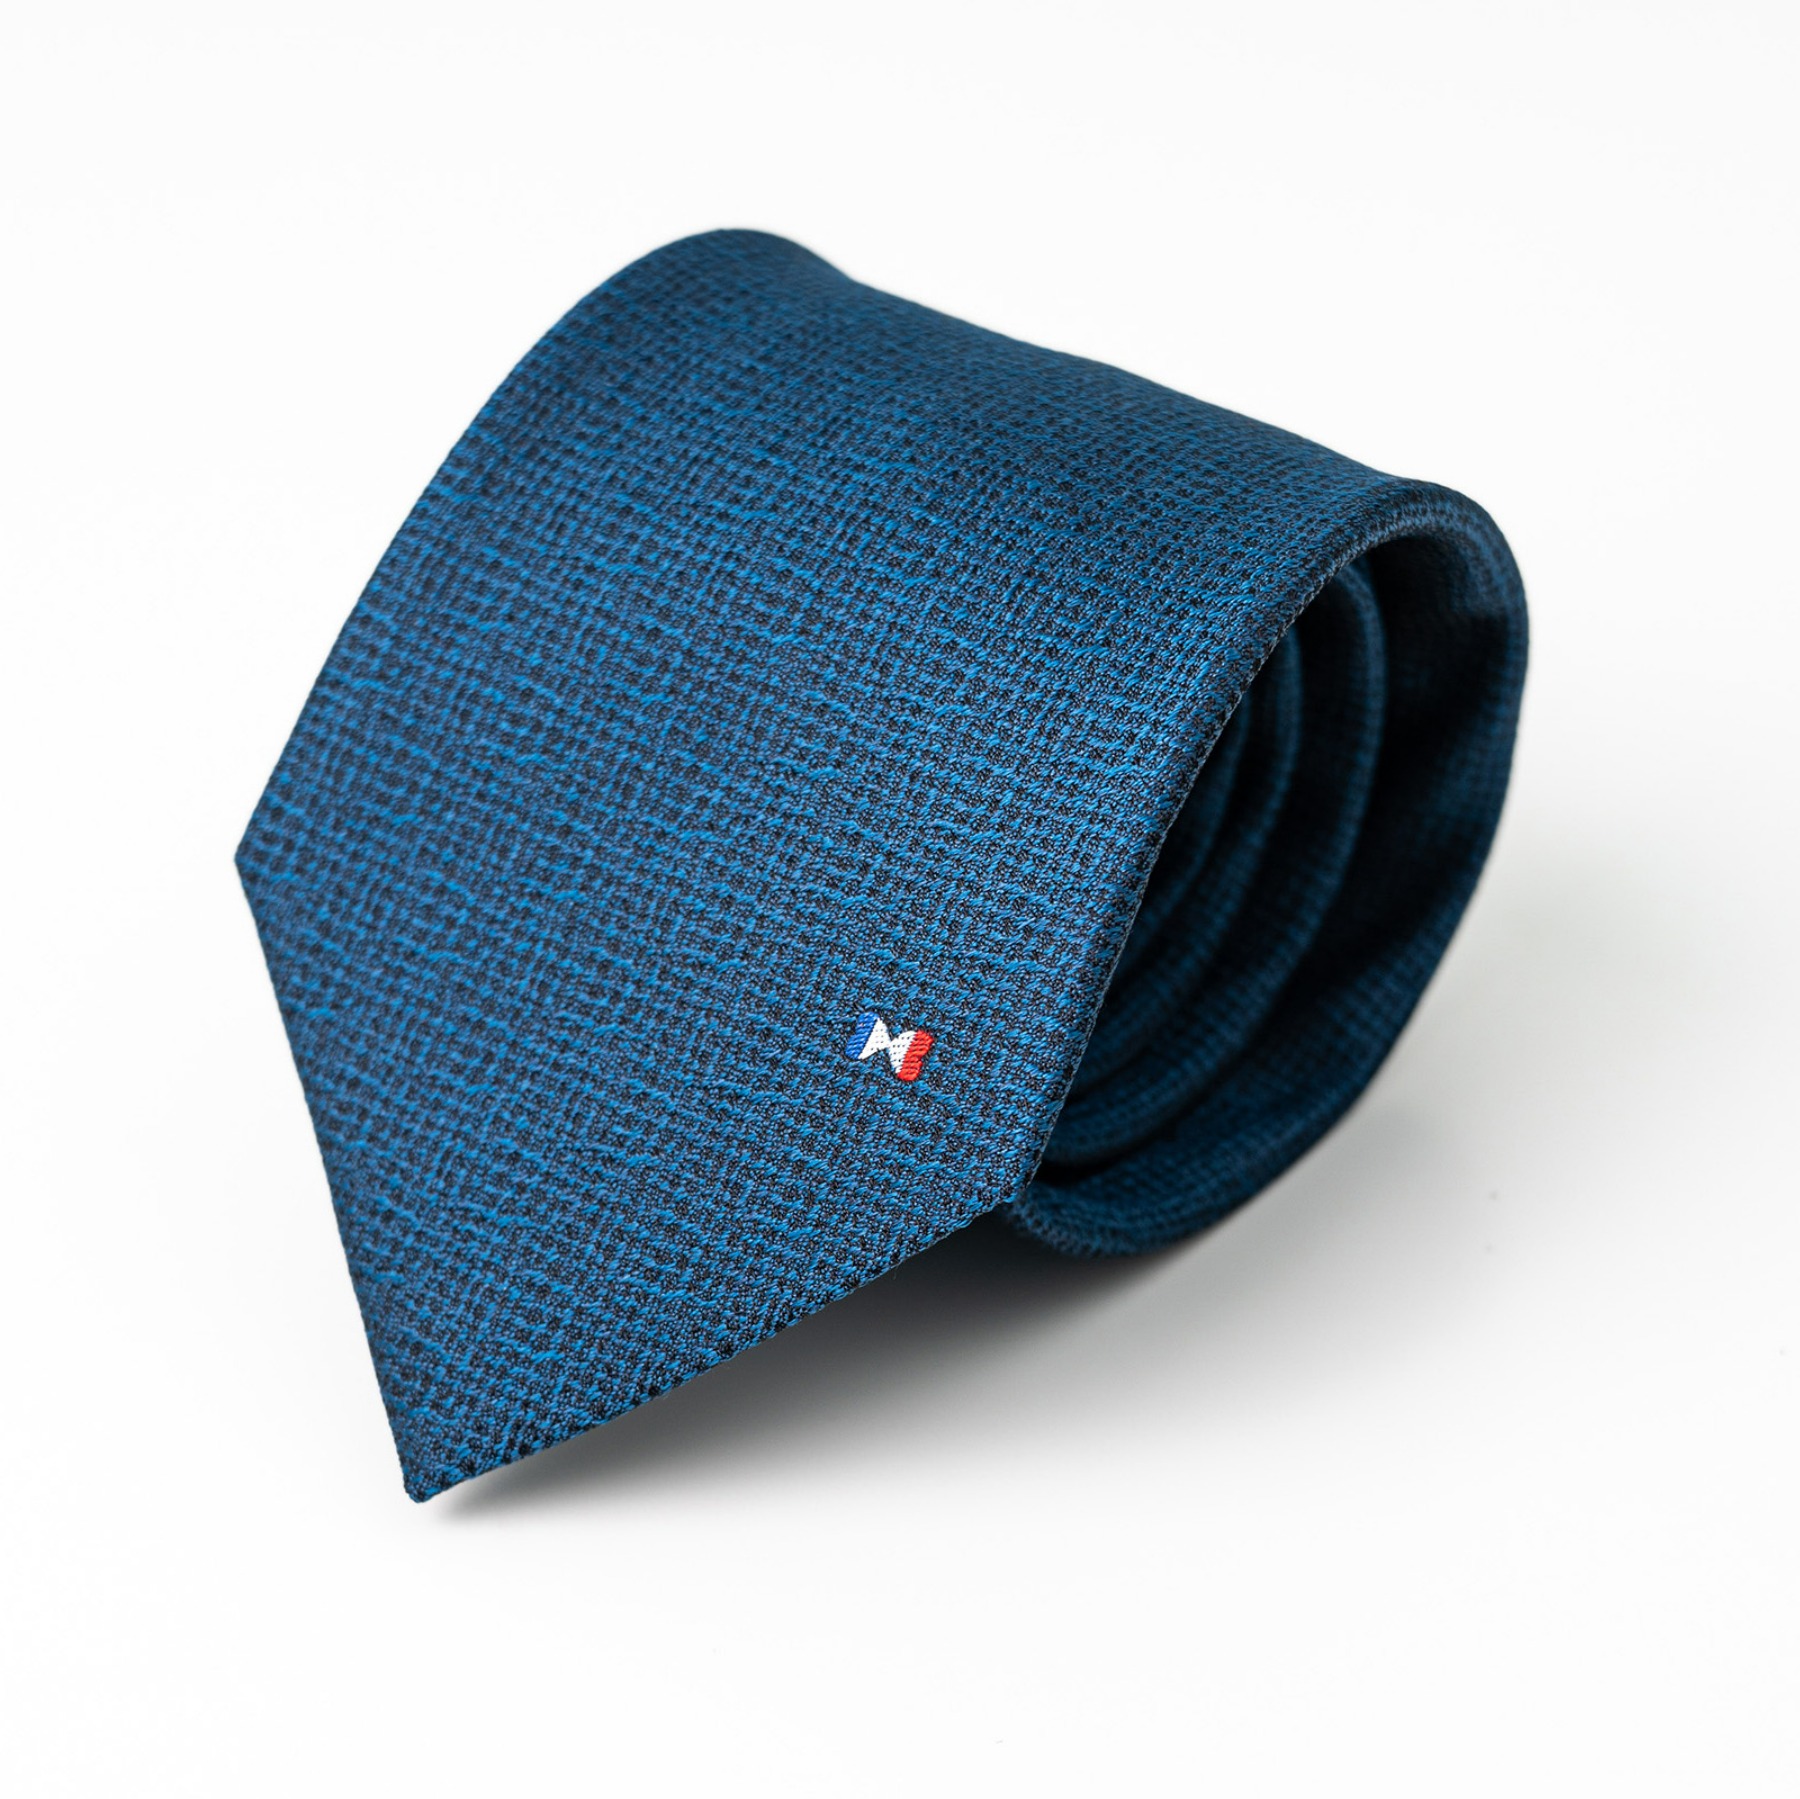 [Silk] FRENCH HEART POINT TIE - MINT